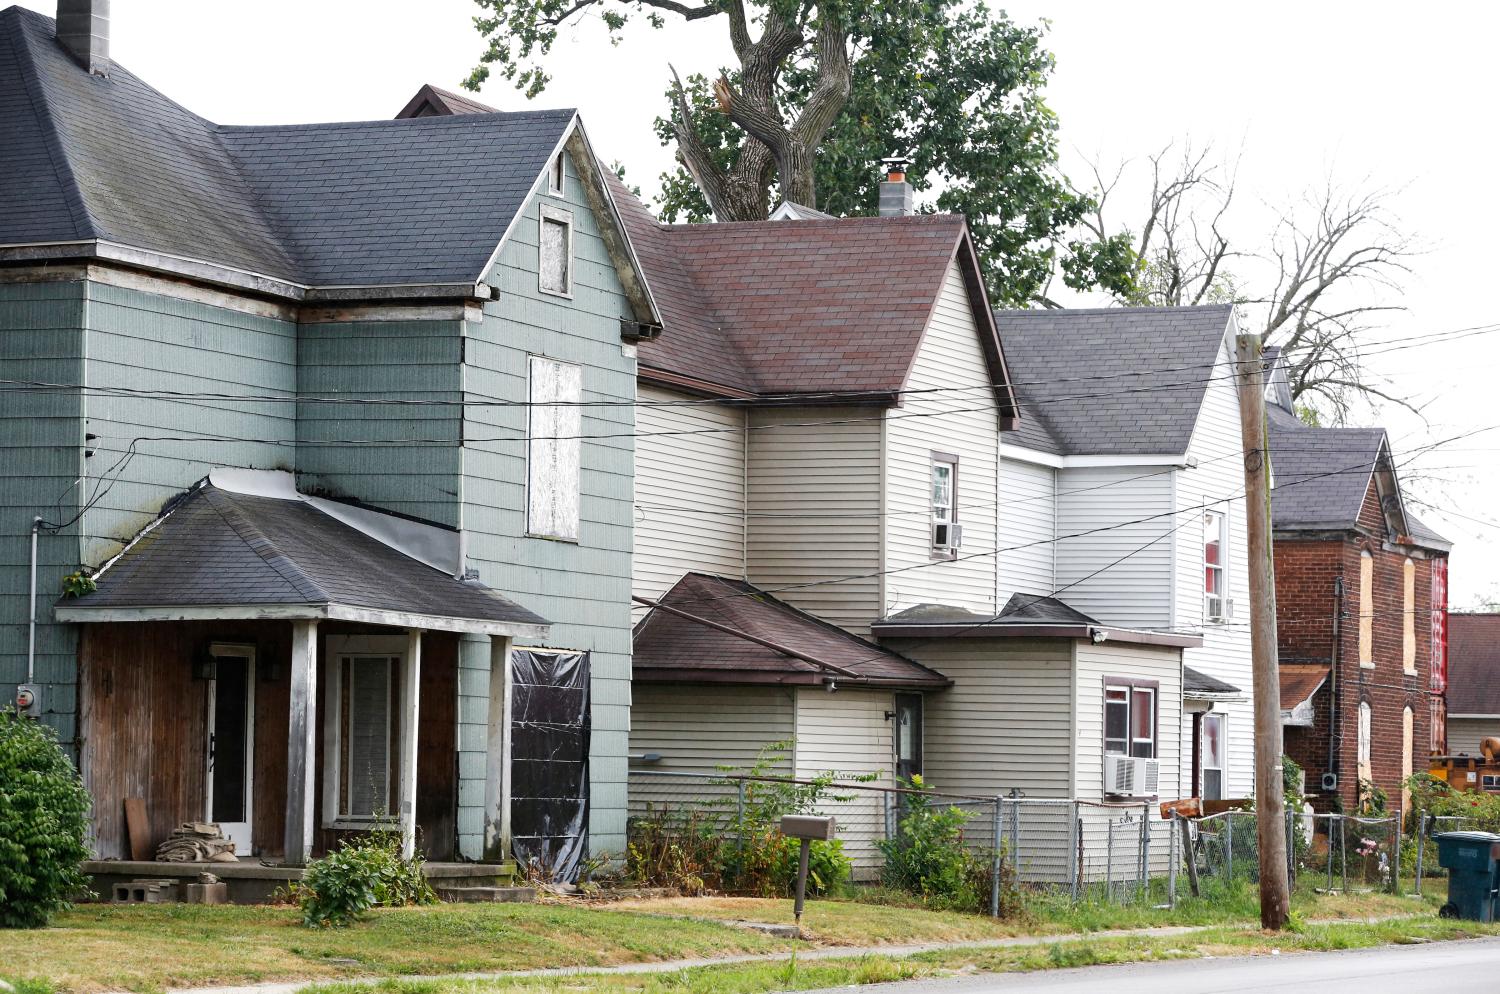 Boarded up and run down homes sit on a street in Muncie, Indiana, U.S., August 13, 2016. Picture taken August 13, 2016. TO MOVE WITH SPECIAL REPORT USA-INSECURITY/MUNCIE   REUTERS/Chris Bergin - TM3EC8E1EXH01